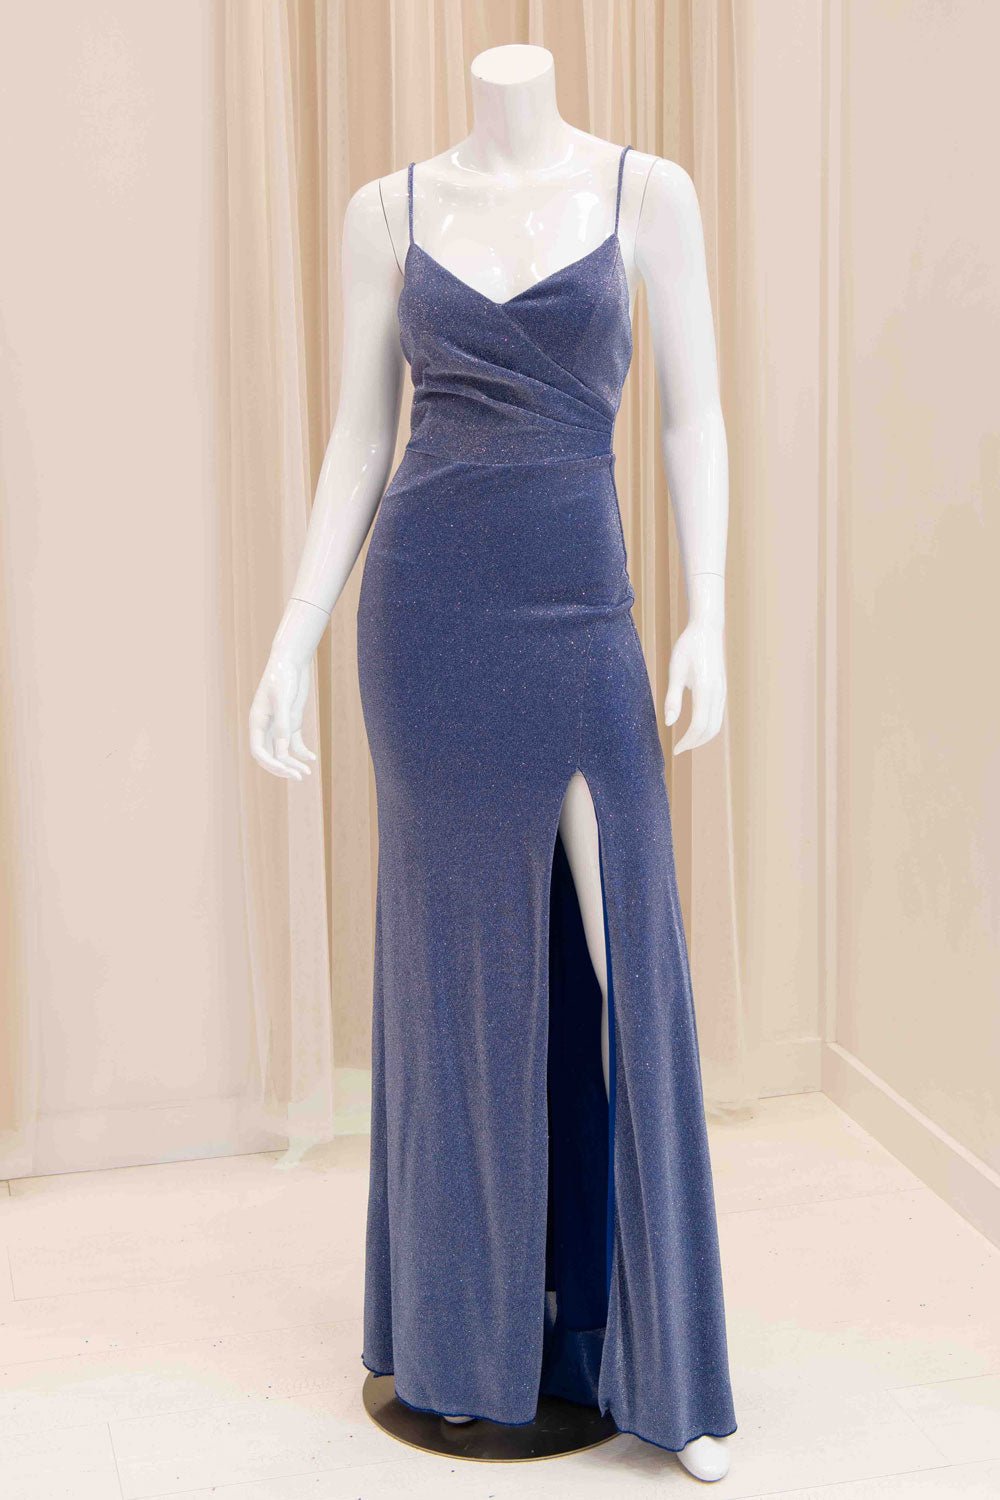 Cecilia Shimmer Evening Dress in Royal Blue